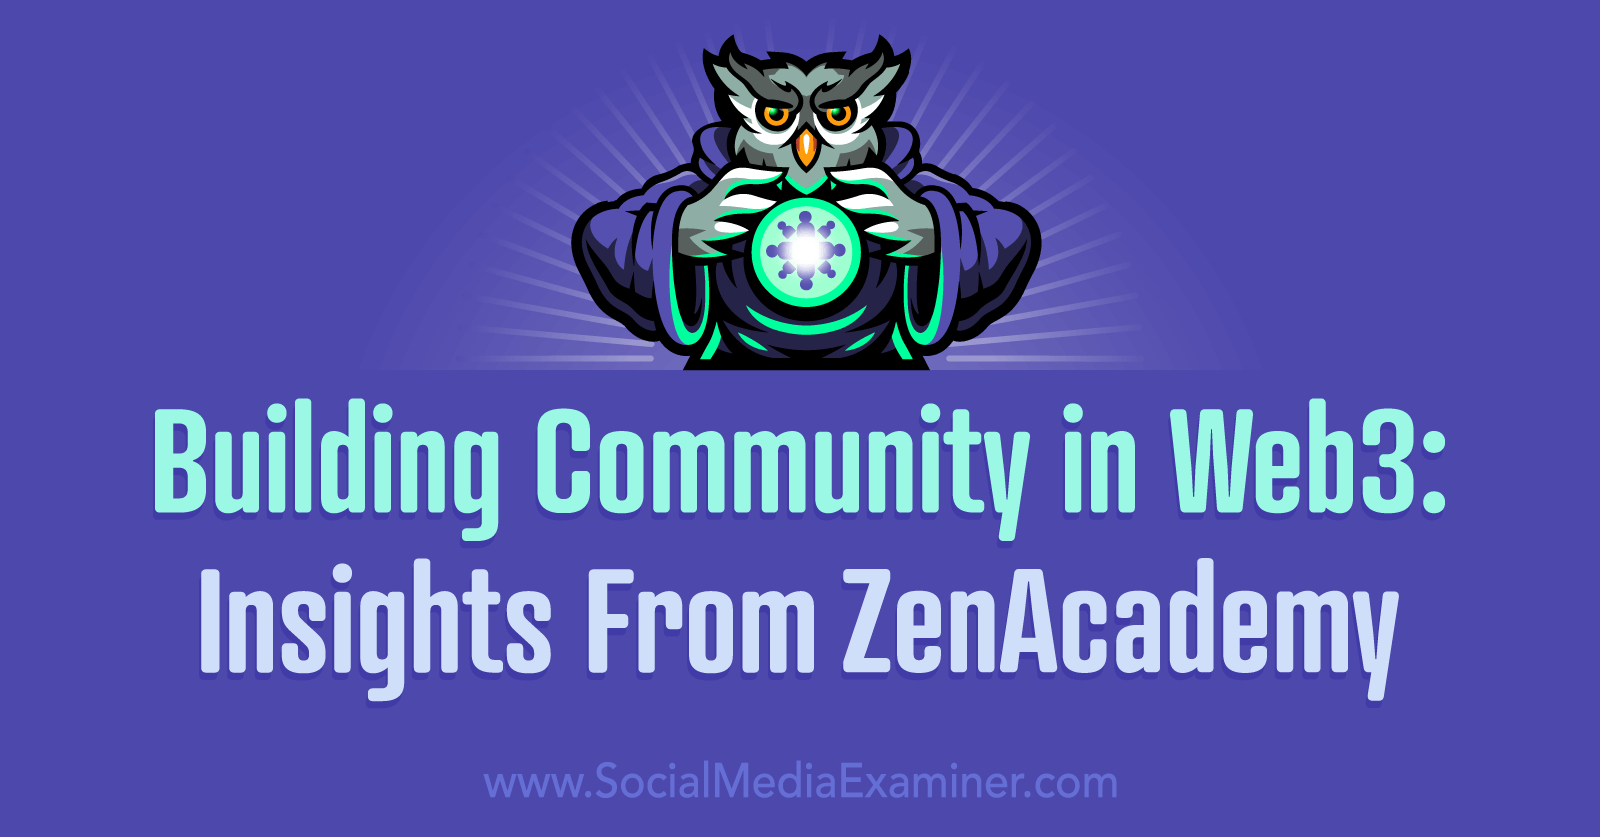 Building Community in Web3: Insights From ZenAcademy by Social Media Examiner